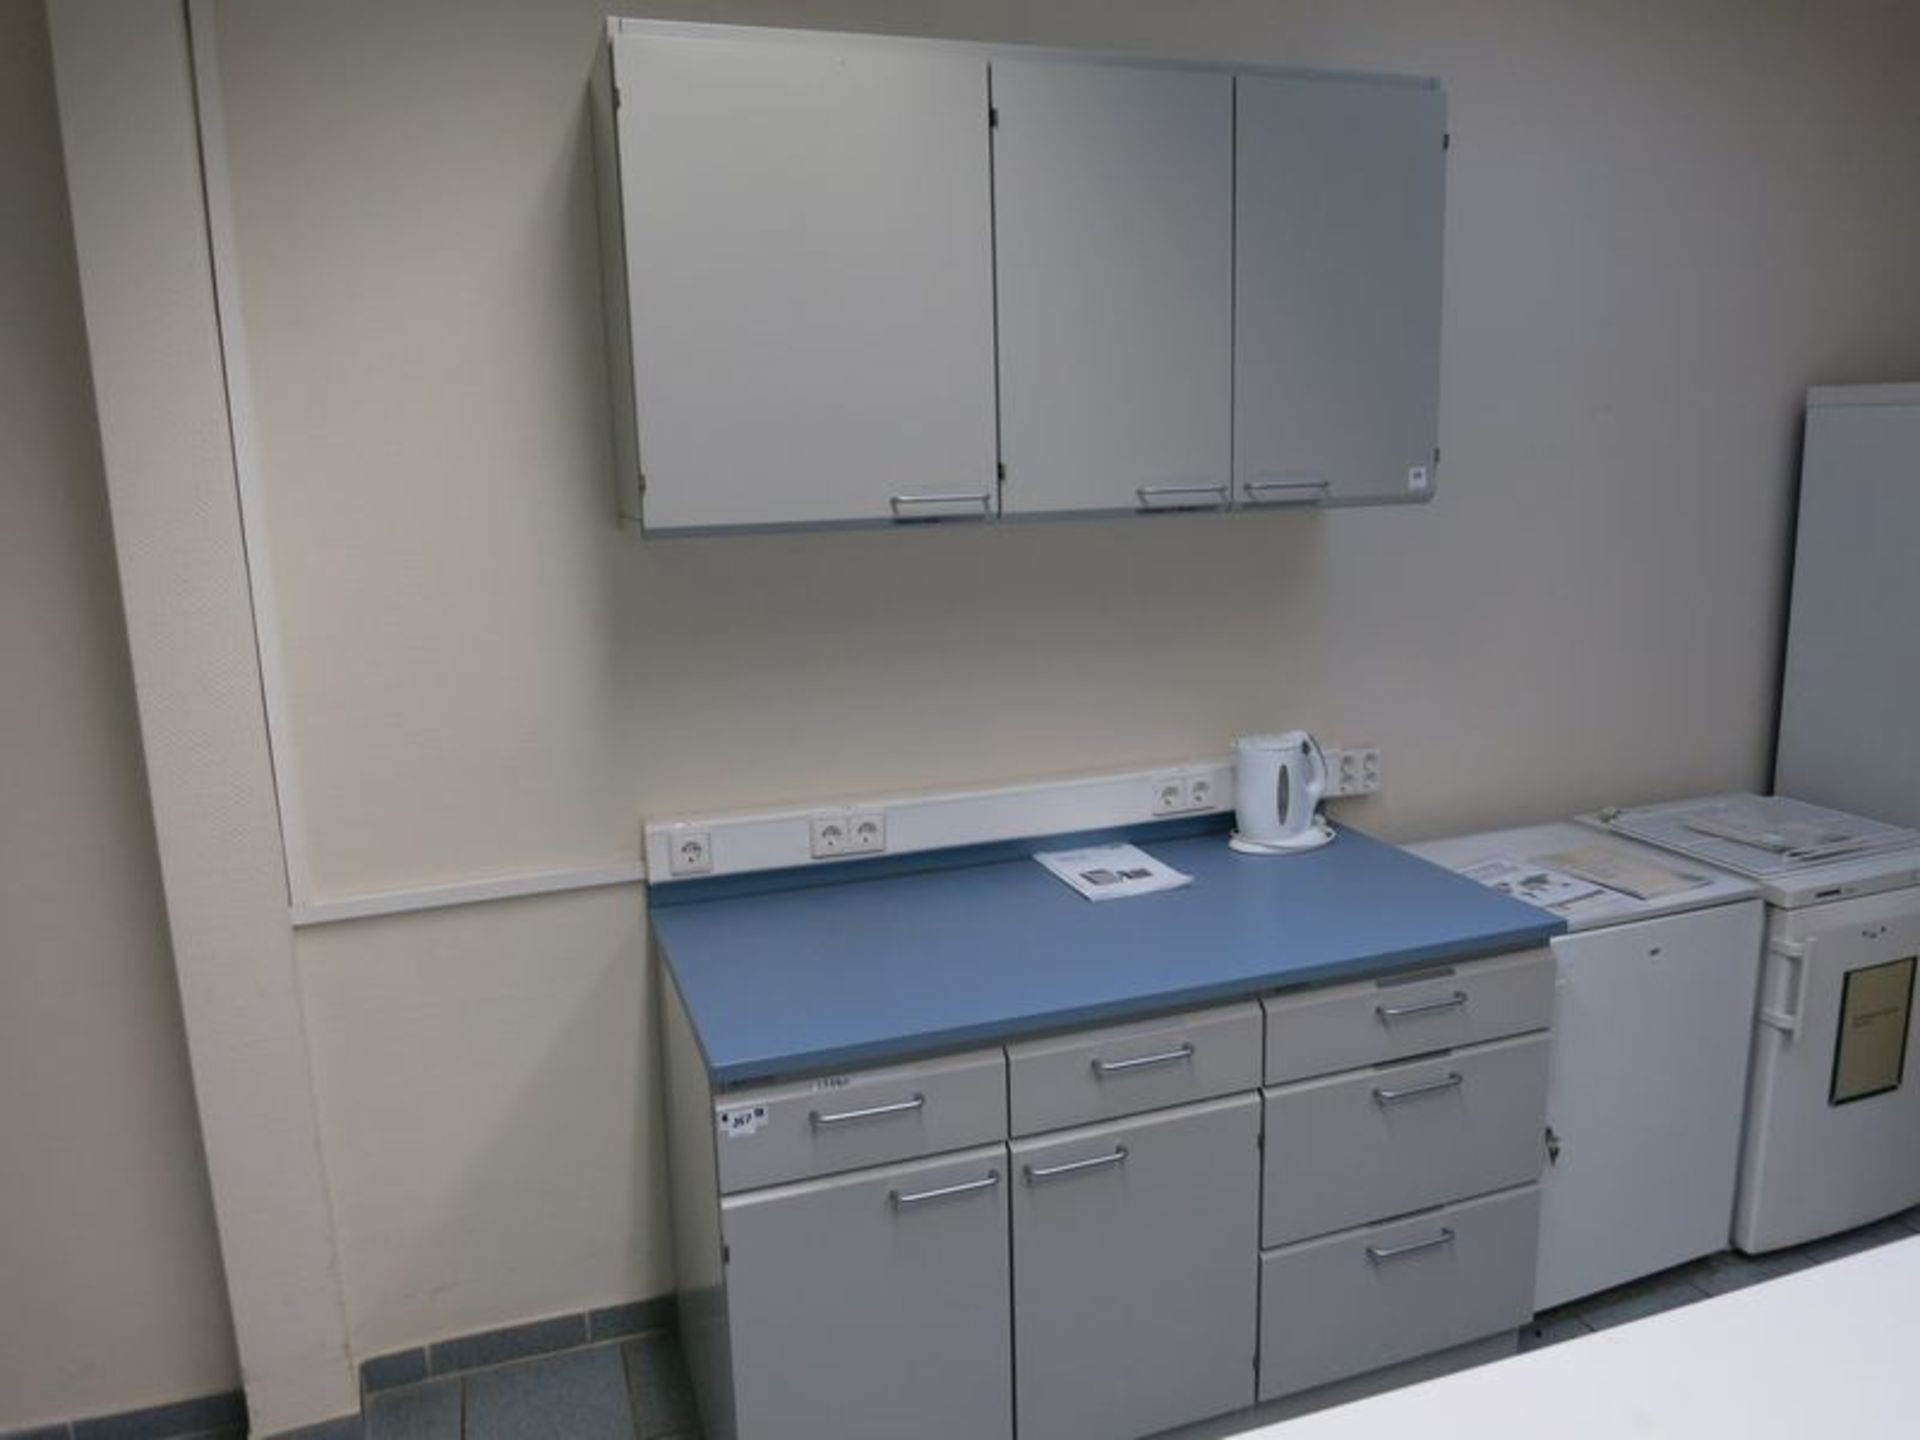 Lot of Laboratory furniture, counters, sinks, tables, wall cabinets  [Location: Bldg 6.] - Image 5 of 7